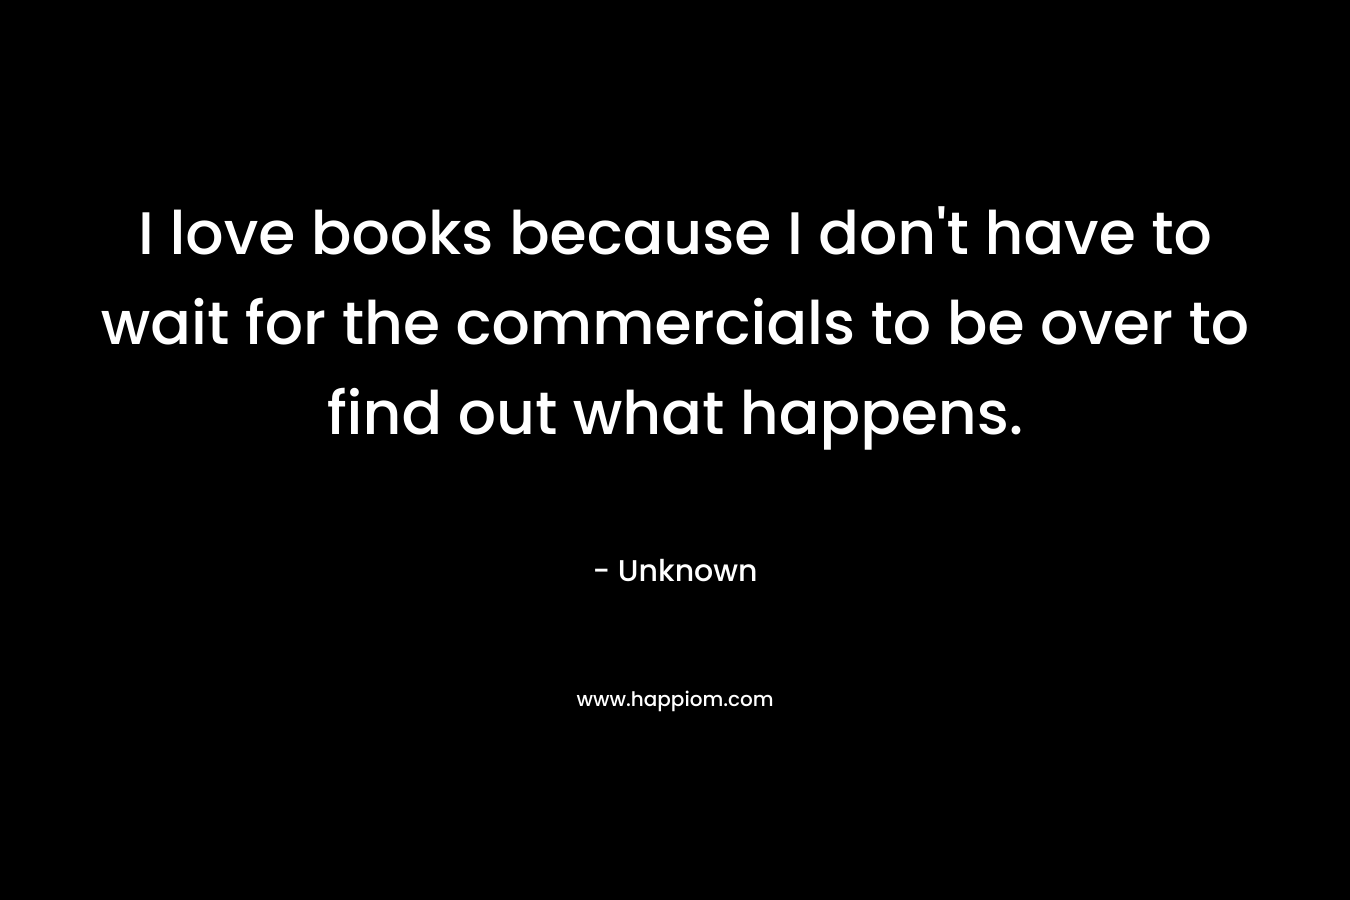 I love books because I don’t have to wait for the commercials to be over to find out what happens. – Unknown